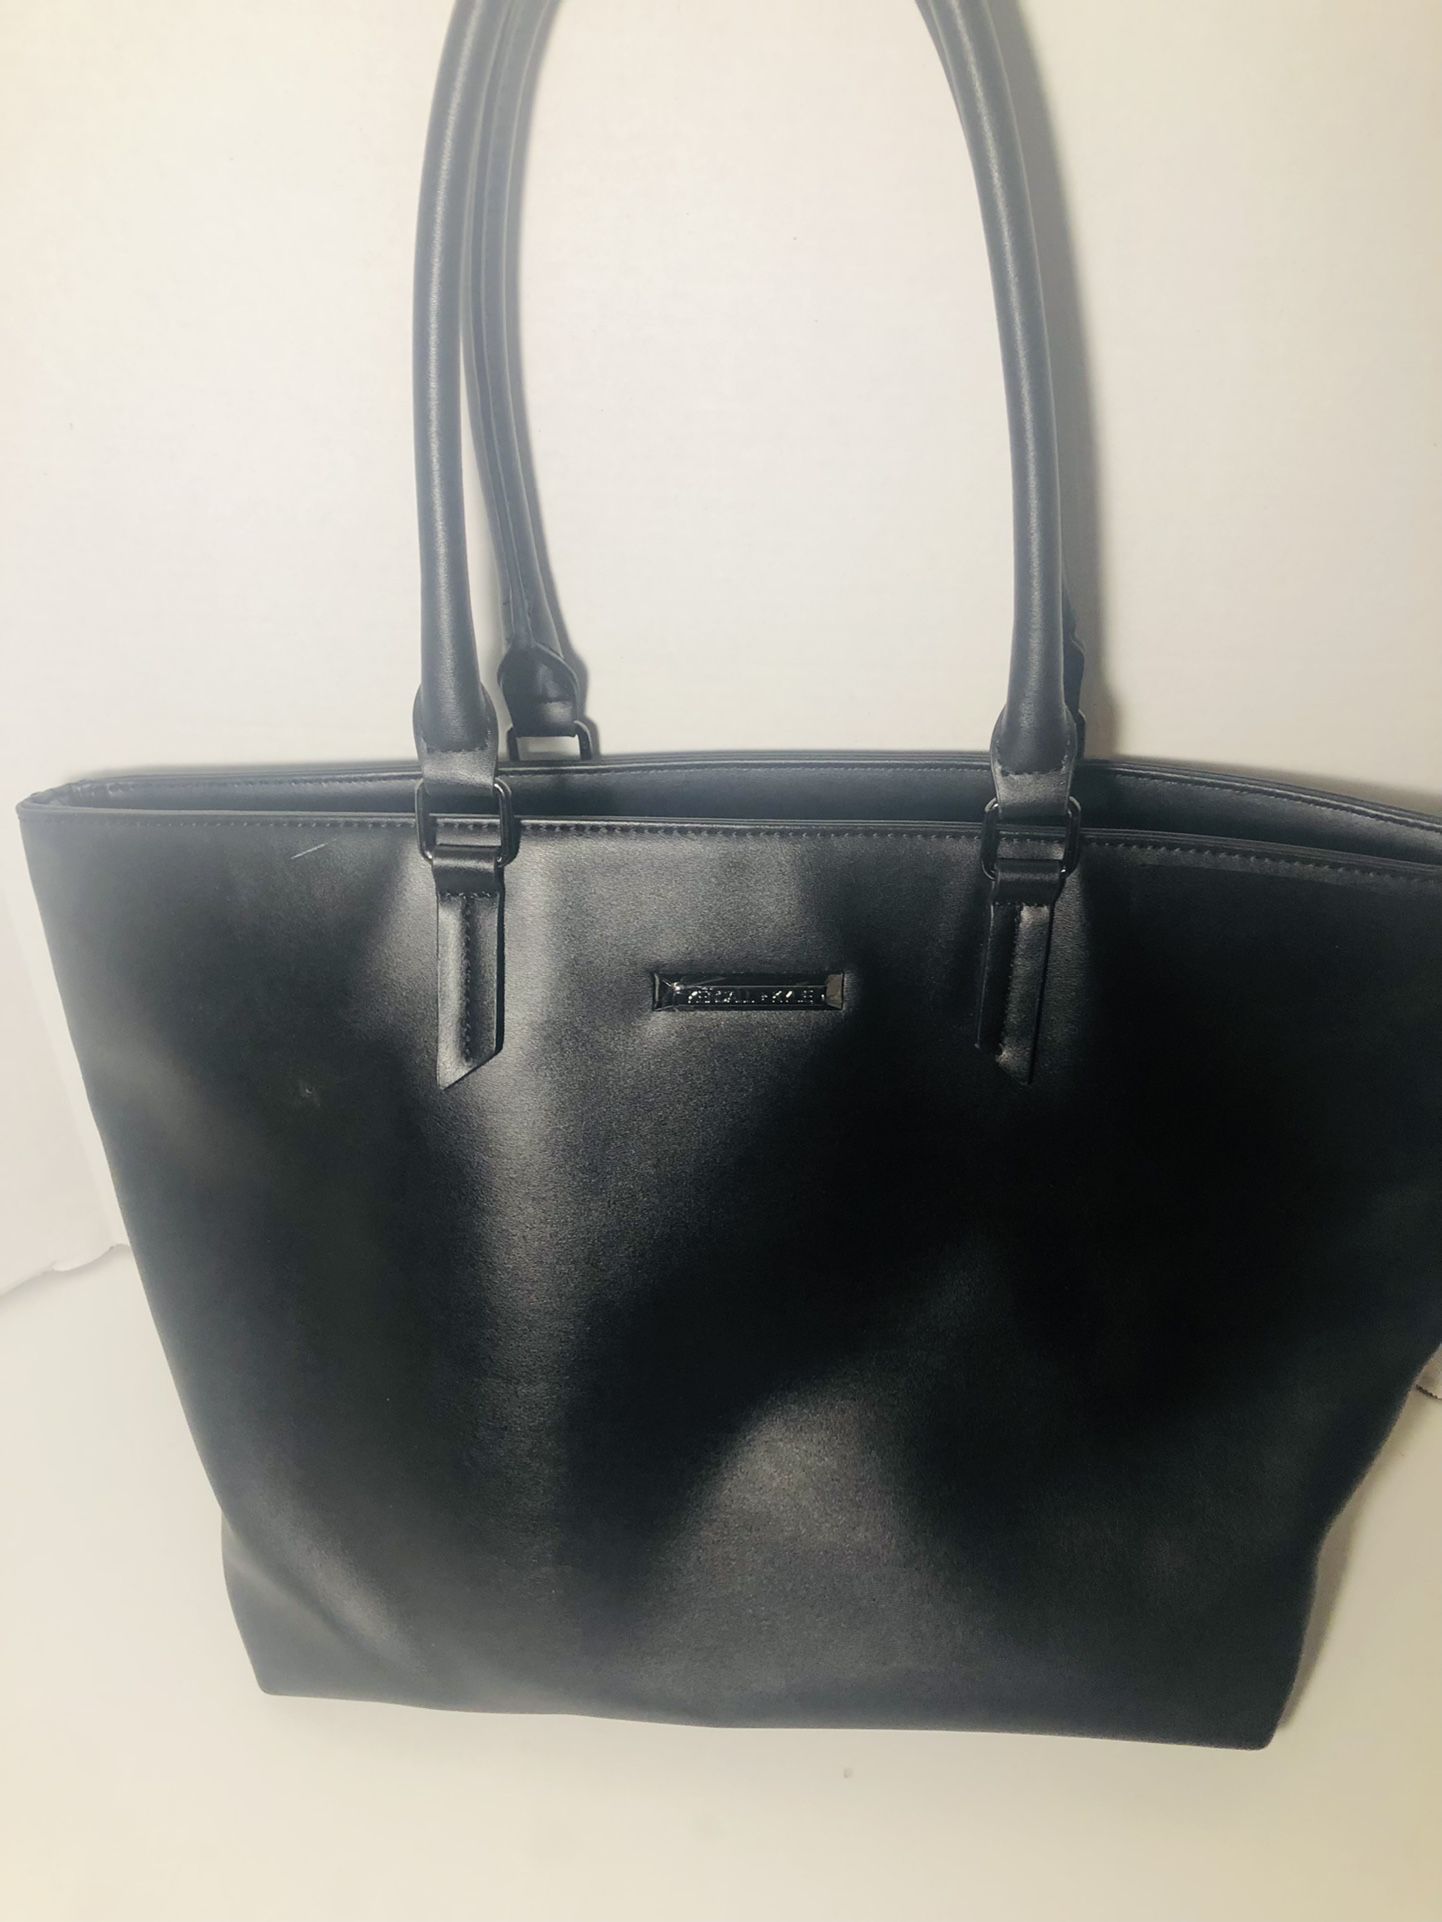 Kendall & Kylie Large Tote Bag Black Color - Excellent Condition Never Used